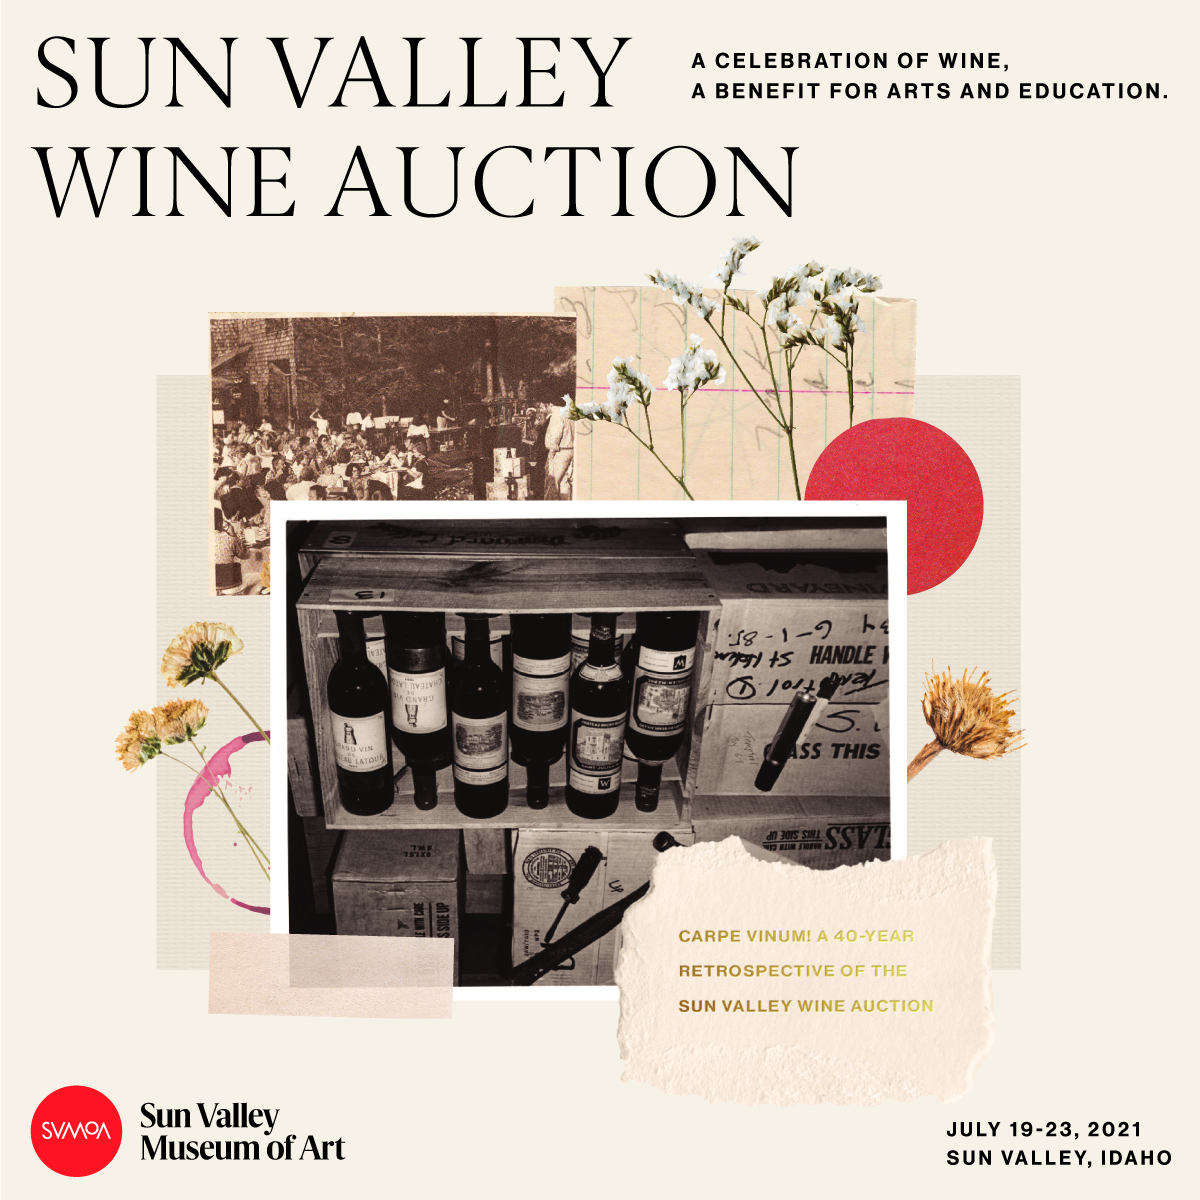 2021 Sun Valley Wine Auction Save the Date, July 19-23